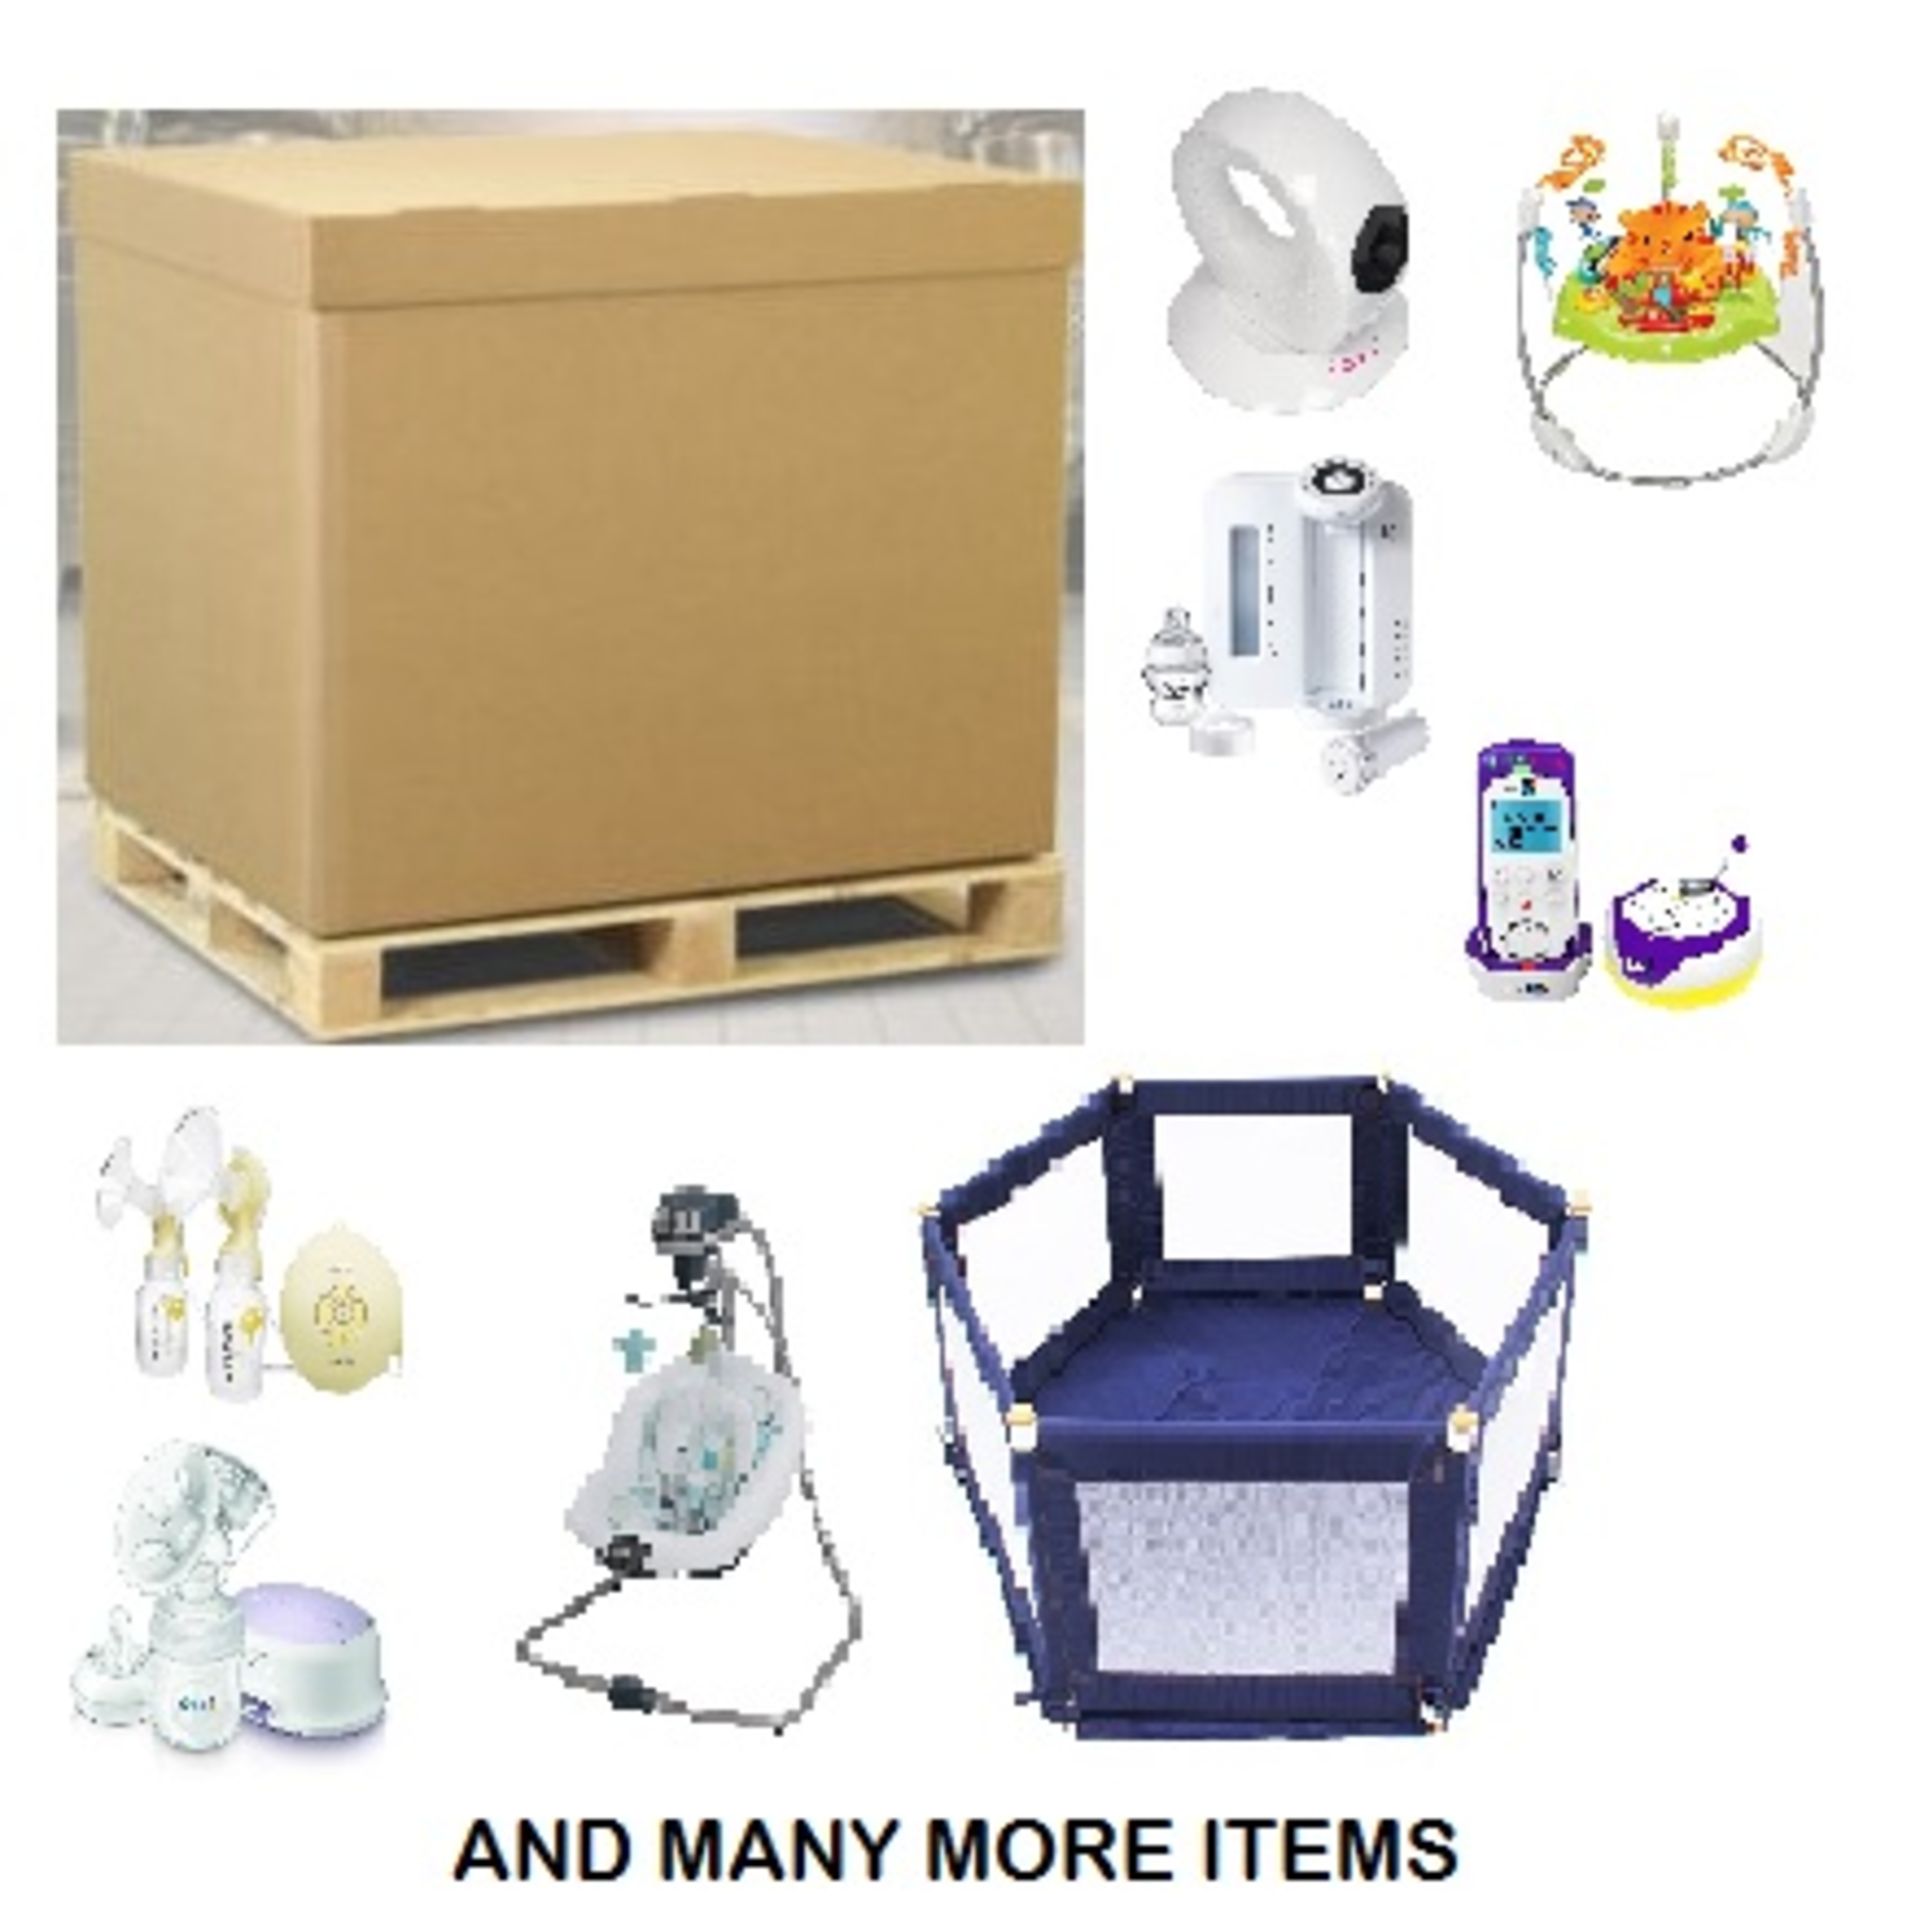 Faulty Returns - Spares Repairs Baby Products - UK Brands - 32 Items - RRP £2,013.94 - FREE DELIVERY - Image 2 of 3